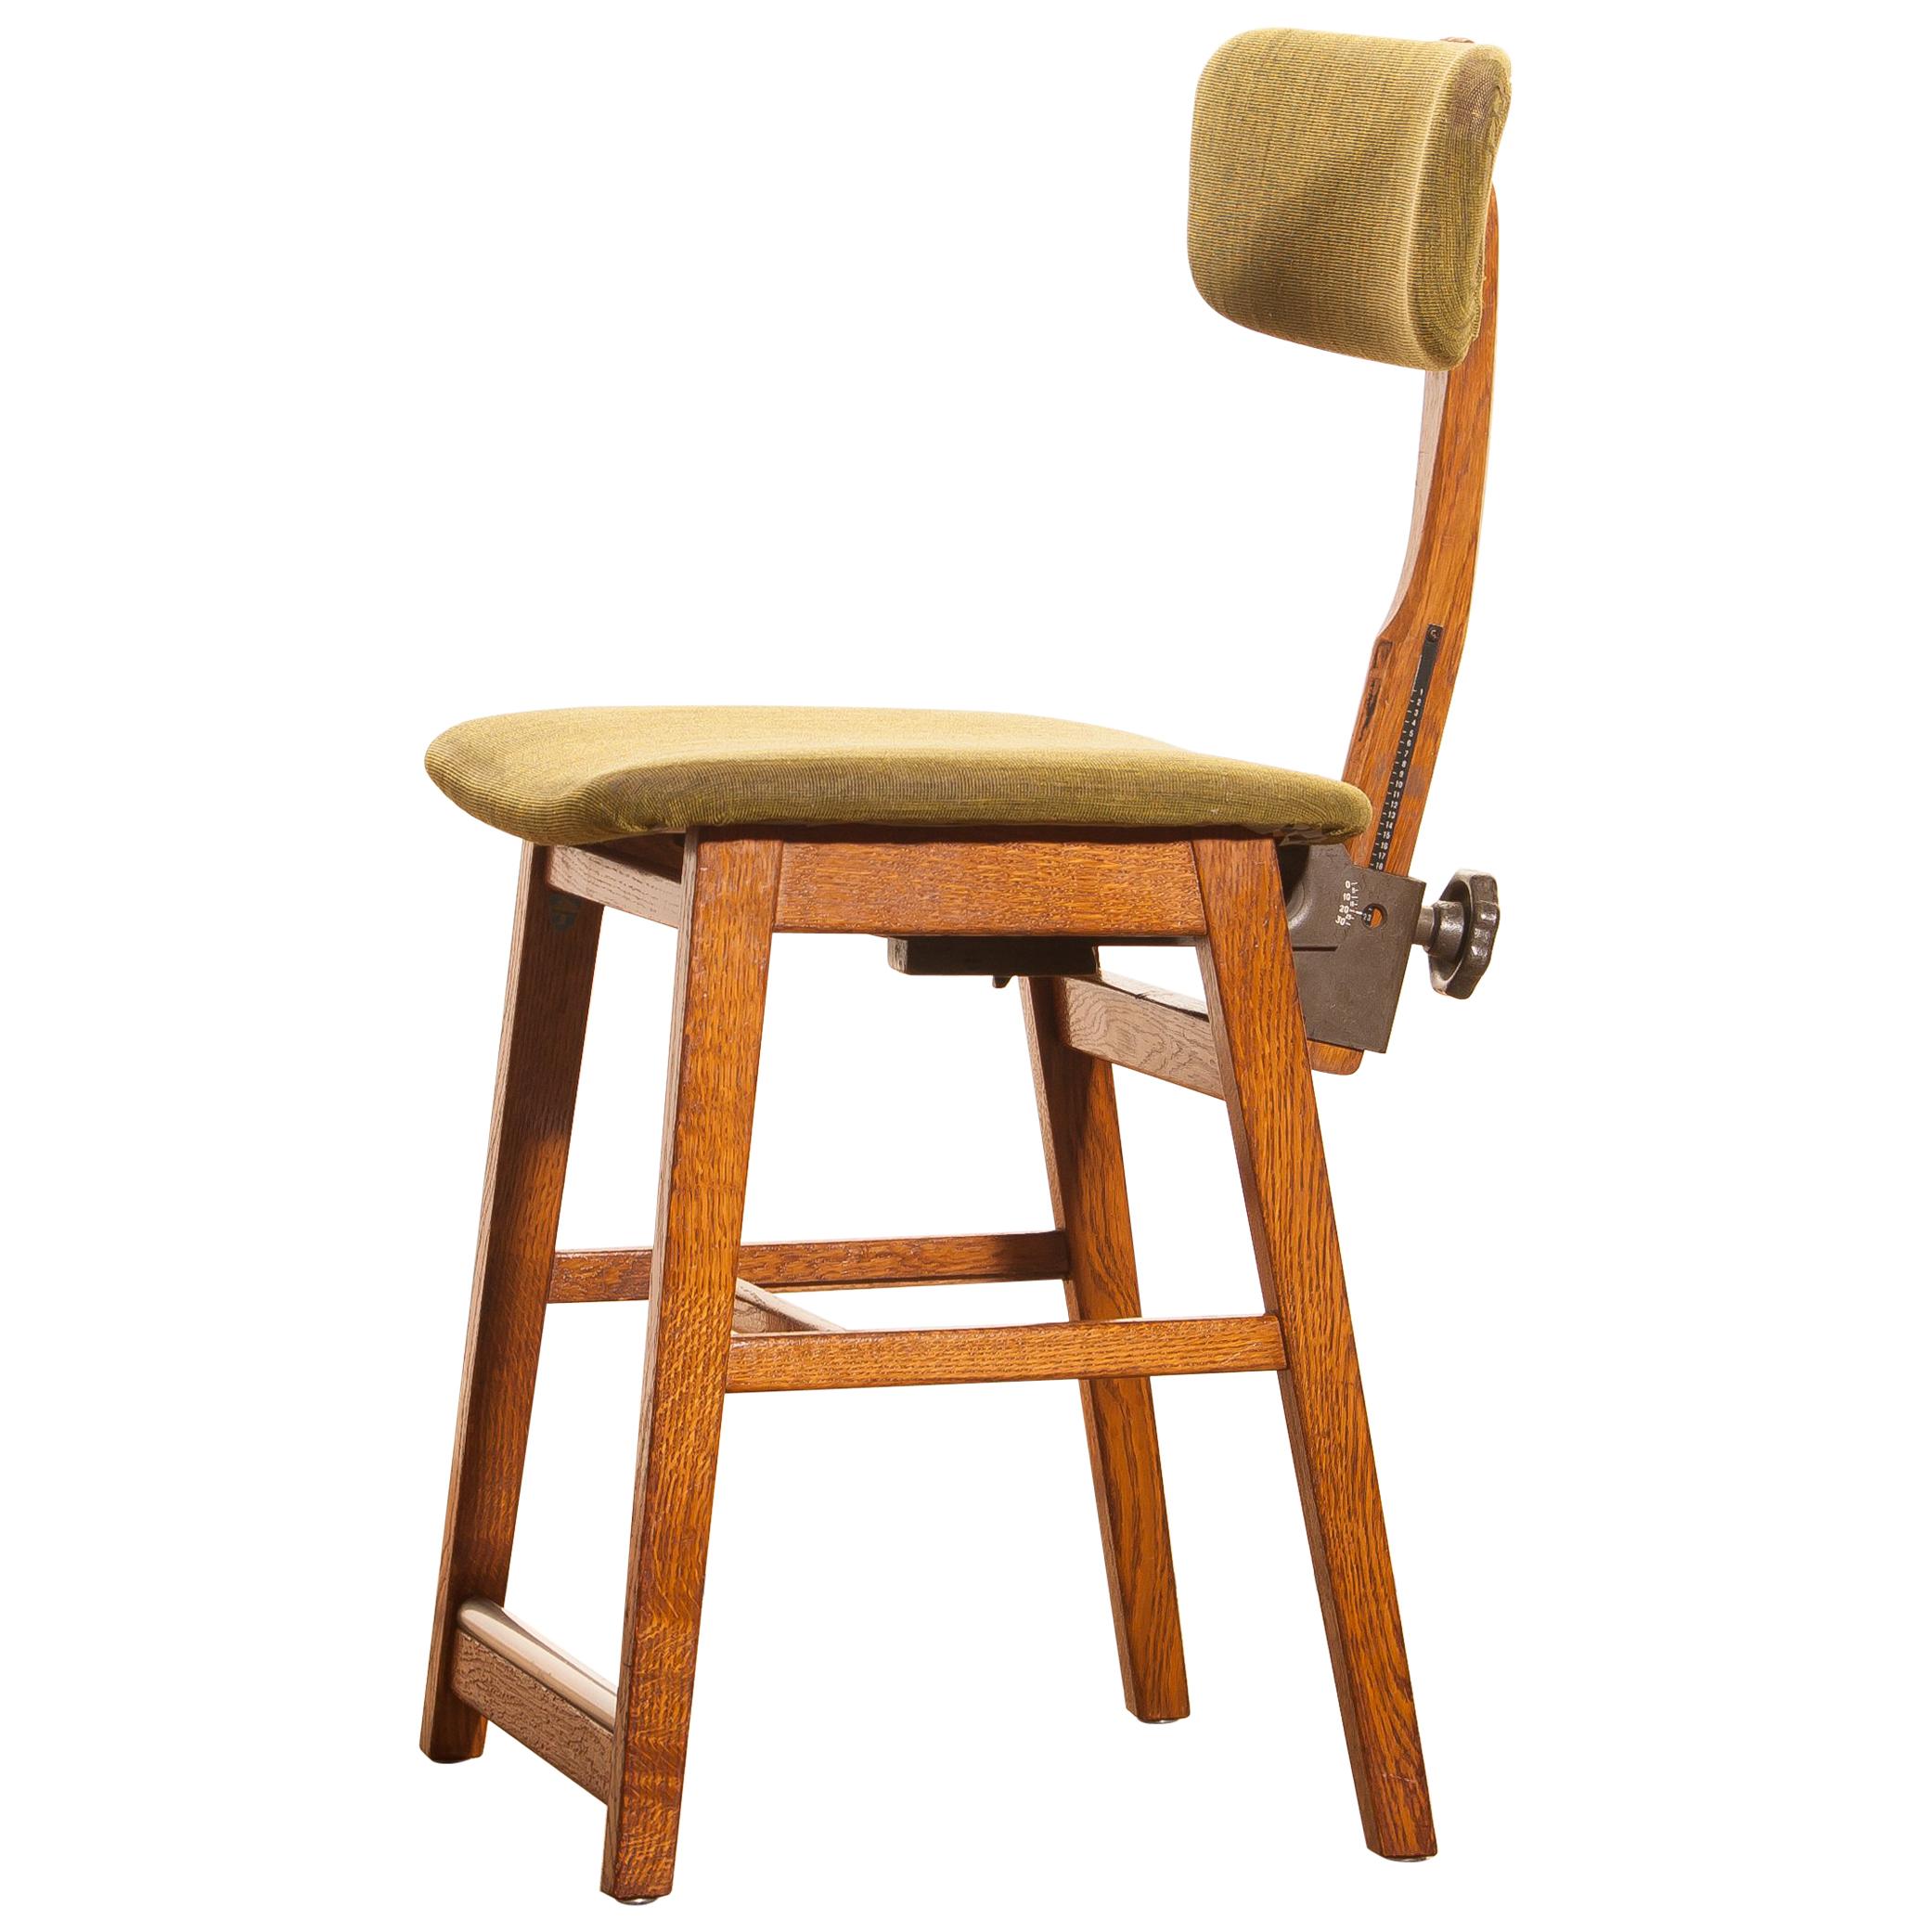 Beautiful desk chair produced and labelled by Âtvidabergs, Sweden.
This chair is made of a teak frame with a woollen upholstered seating.
The backrest is adjustable in height and can be tilted.
It is in lovely condition.
Dimensions H 86 cm, W 40